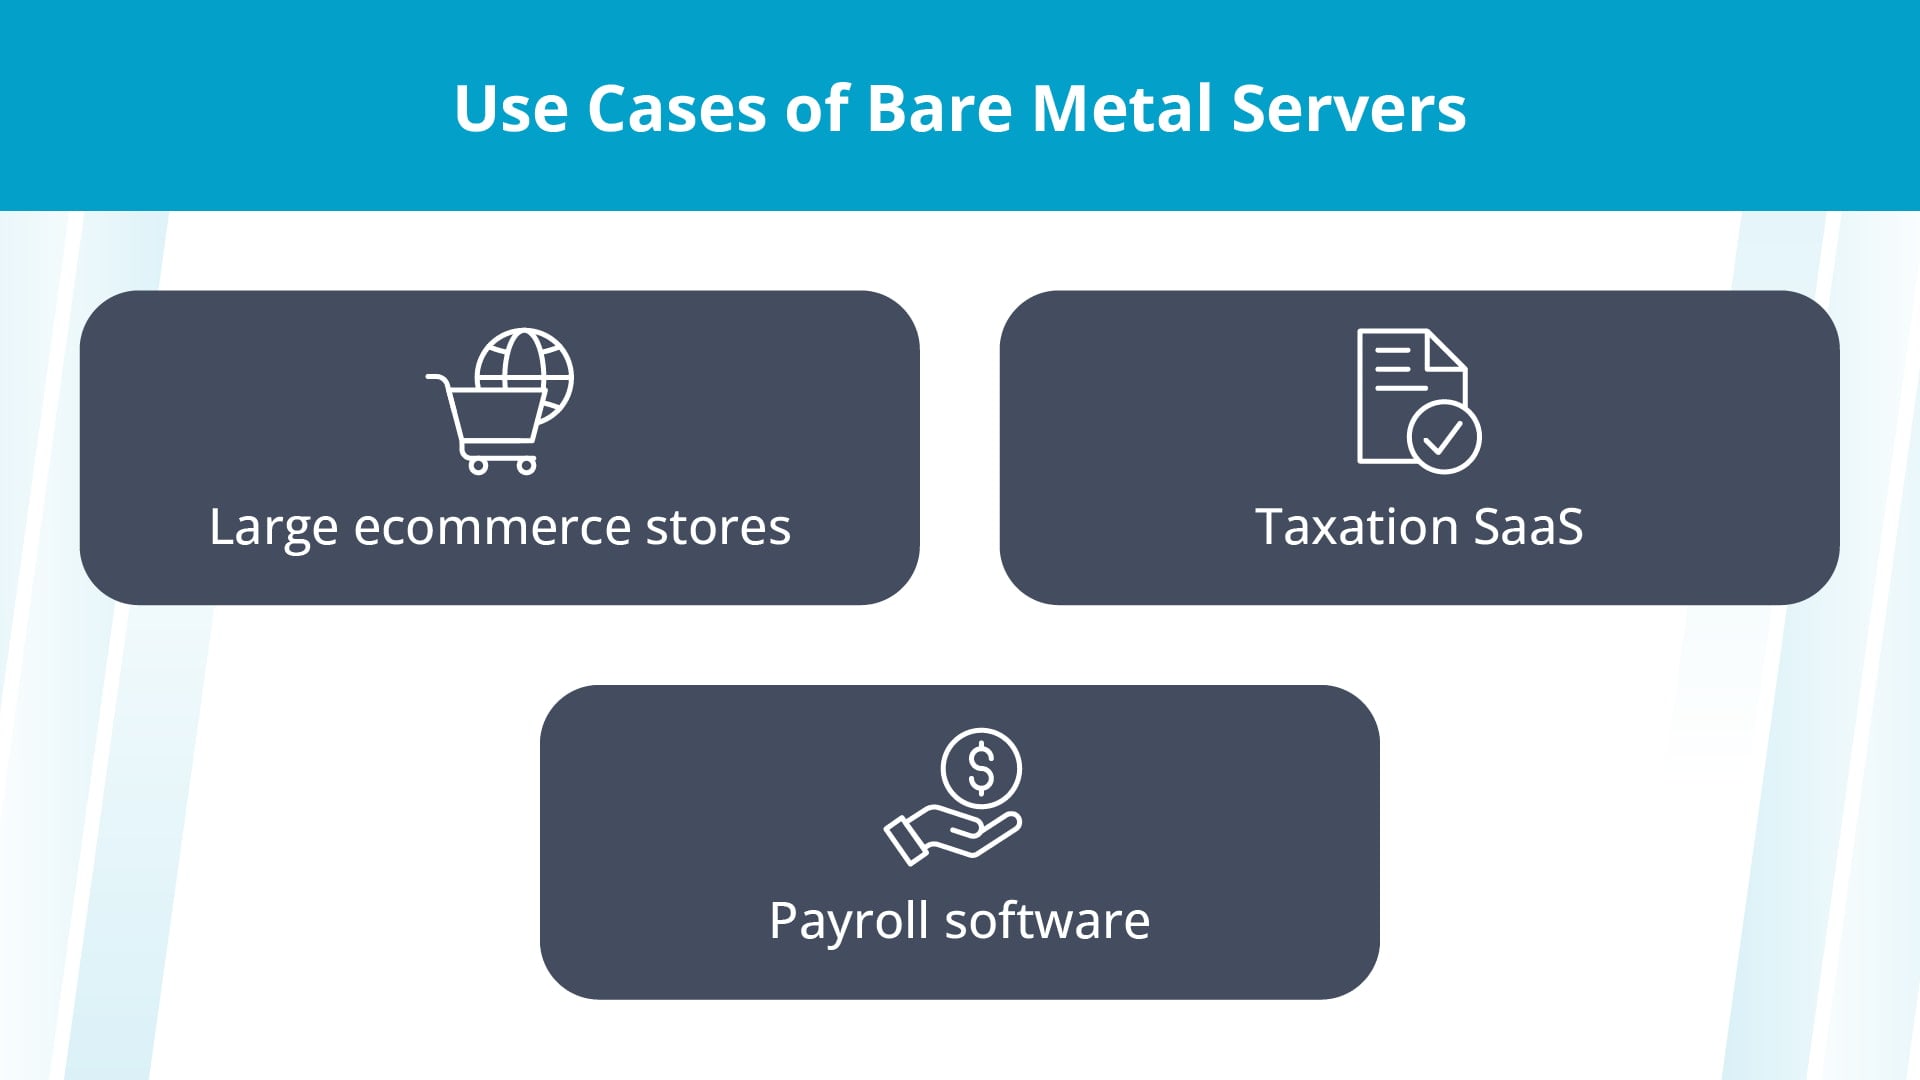 Use cases of bare metal servers.